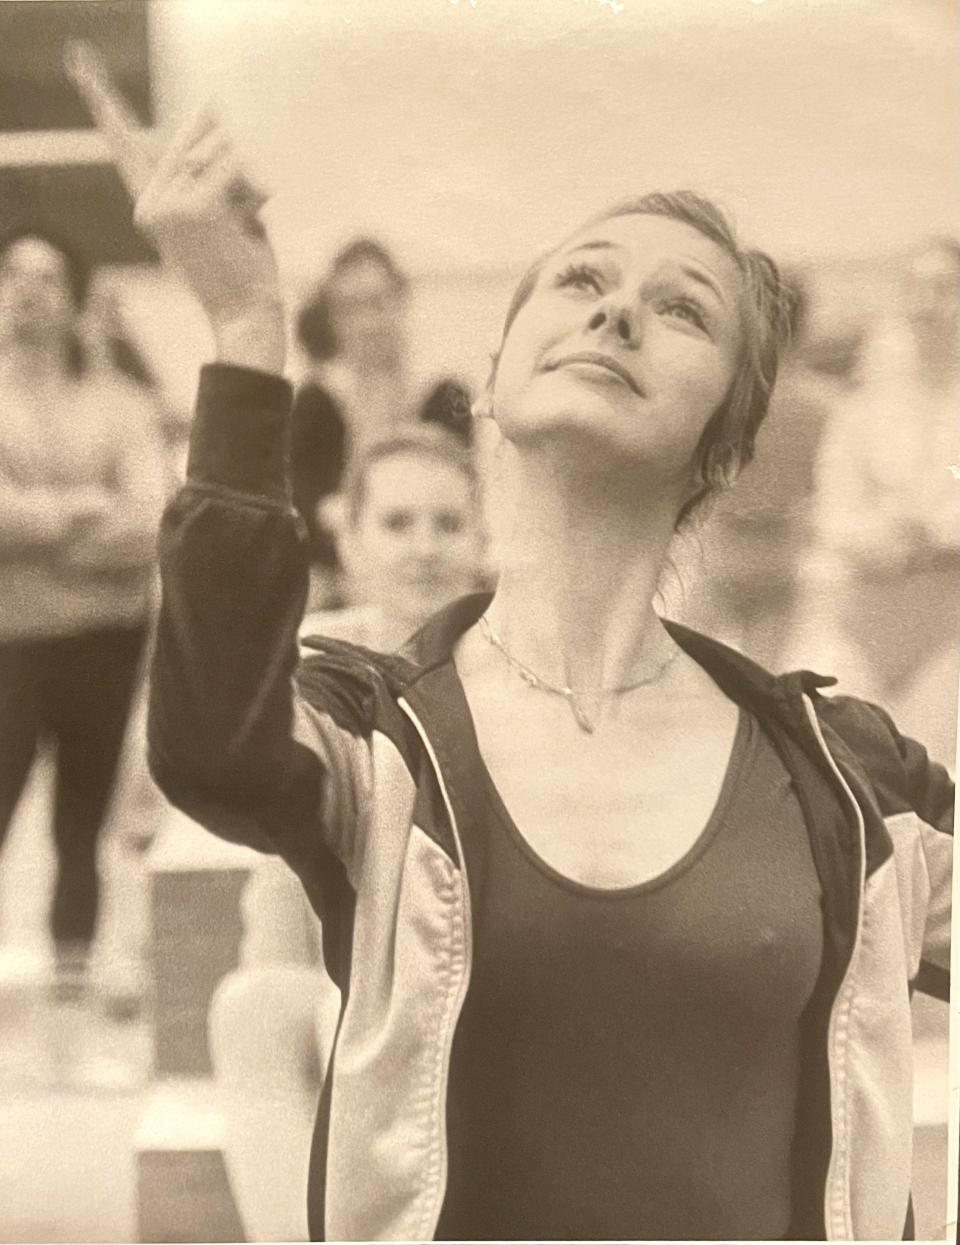 The Tallahassee Ballet's Evening of Music and Dance on Sept. 22 will include a tribute to TTB’s late Resident Choreographer, Dr. Kathryn Karrh Cashin, shown here at a rehearsal, who died June 15, 2023.